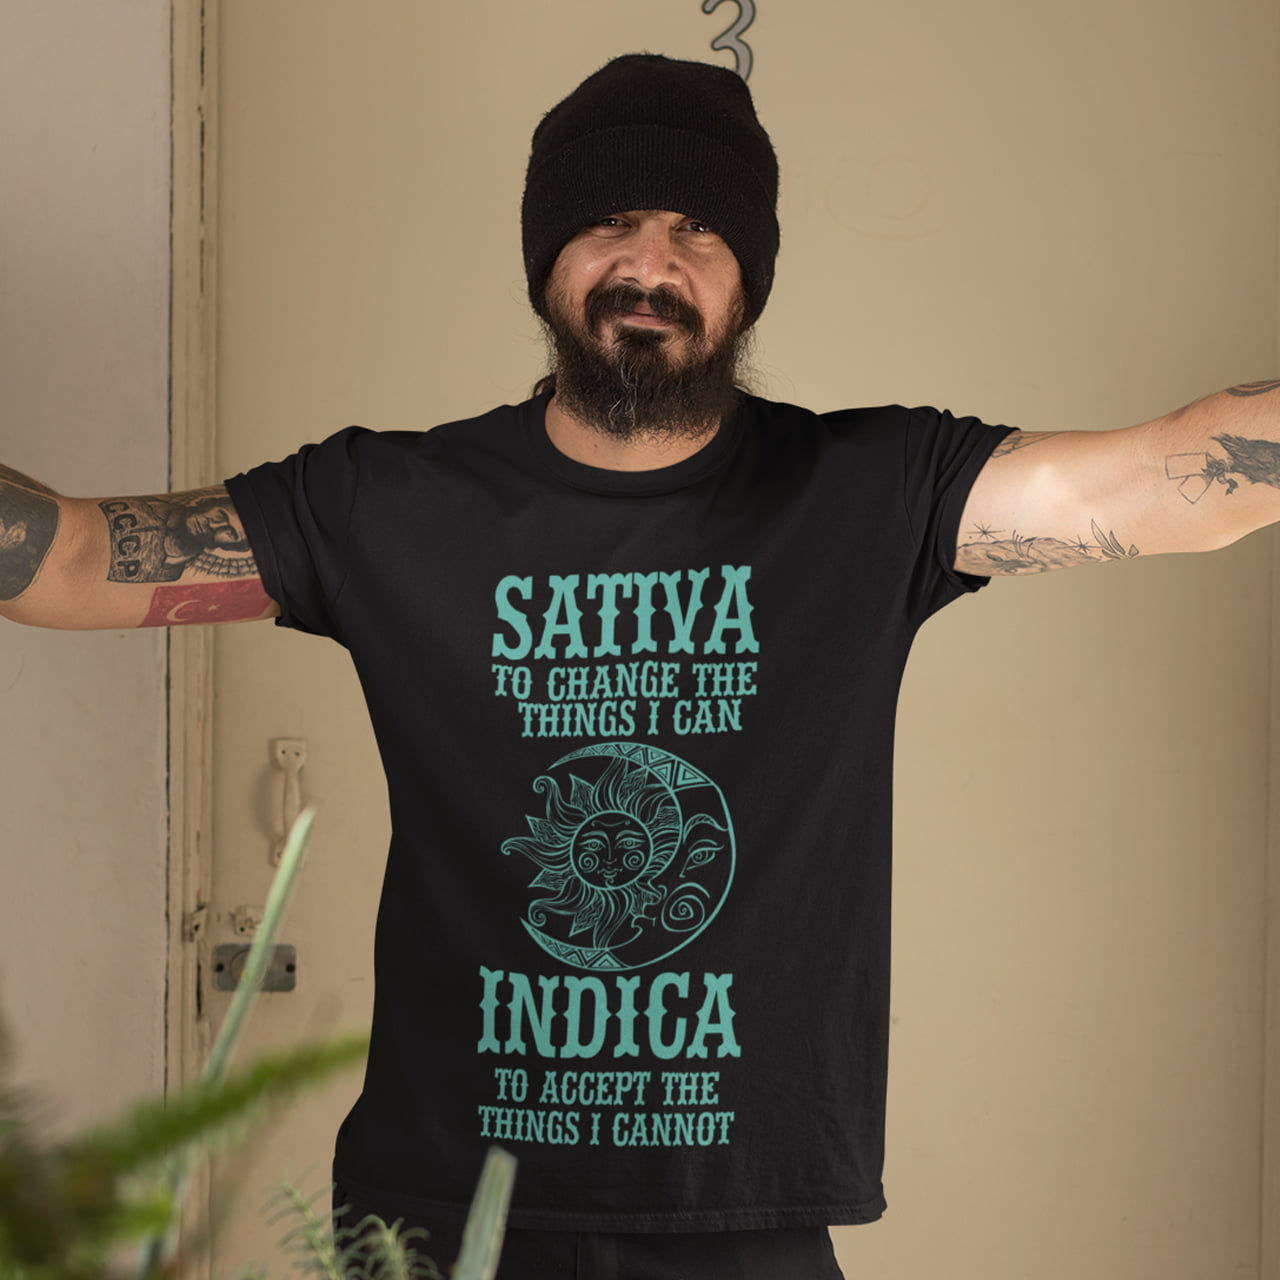 Sativa to change the things I can indica to accept the things I cannot